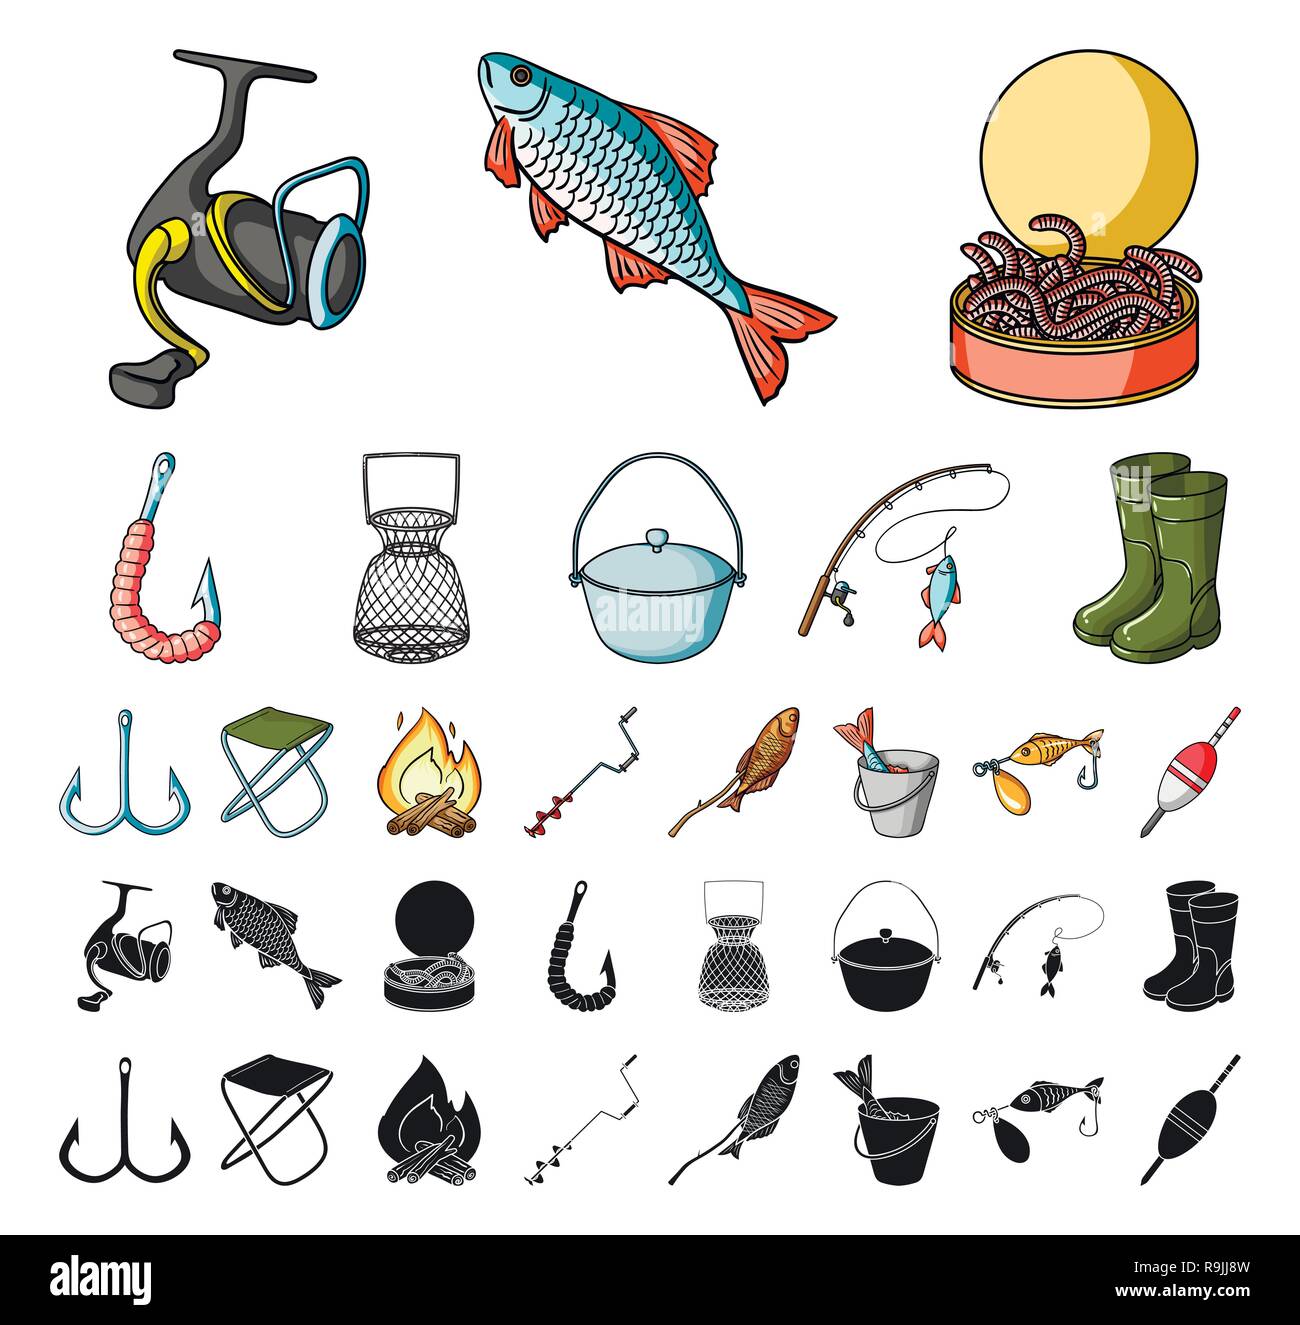 art,bait,boots,bucket,campfire,camping,cartoon,black,catch,collection,design,equipment,excitement,fish,fishing,float,folding,fried,full,hobby,hook,hunting,ice,icon,illustration,isolated,logo,nature,net,pleasure,pond,pot,reel,rest,rod,rubber,screw,set  ...